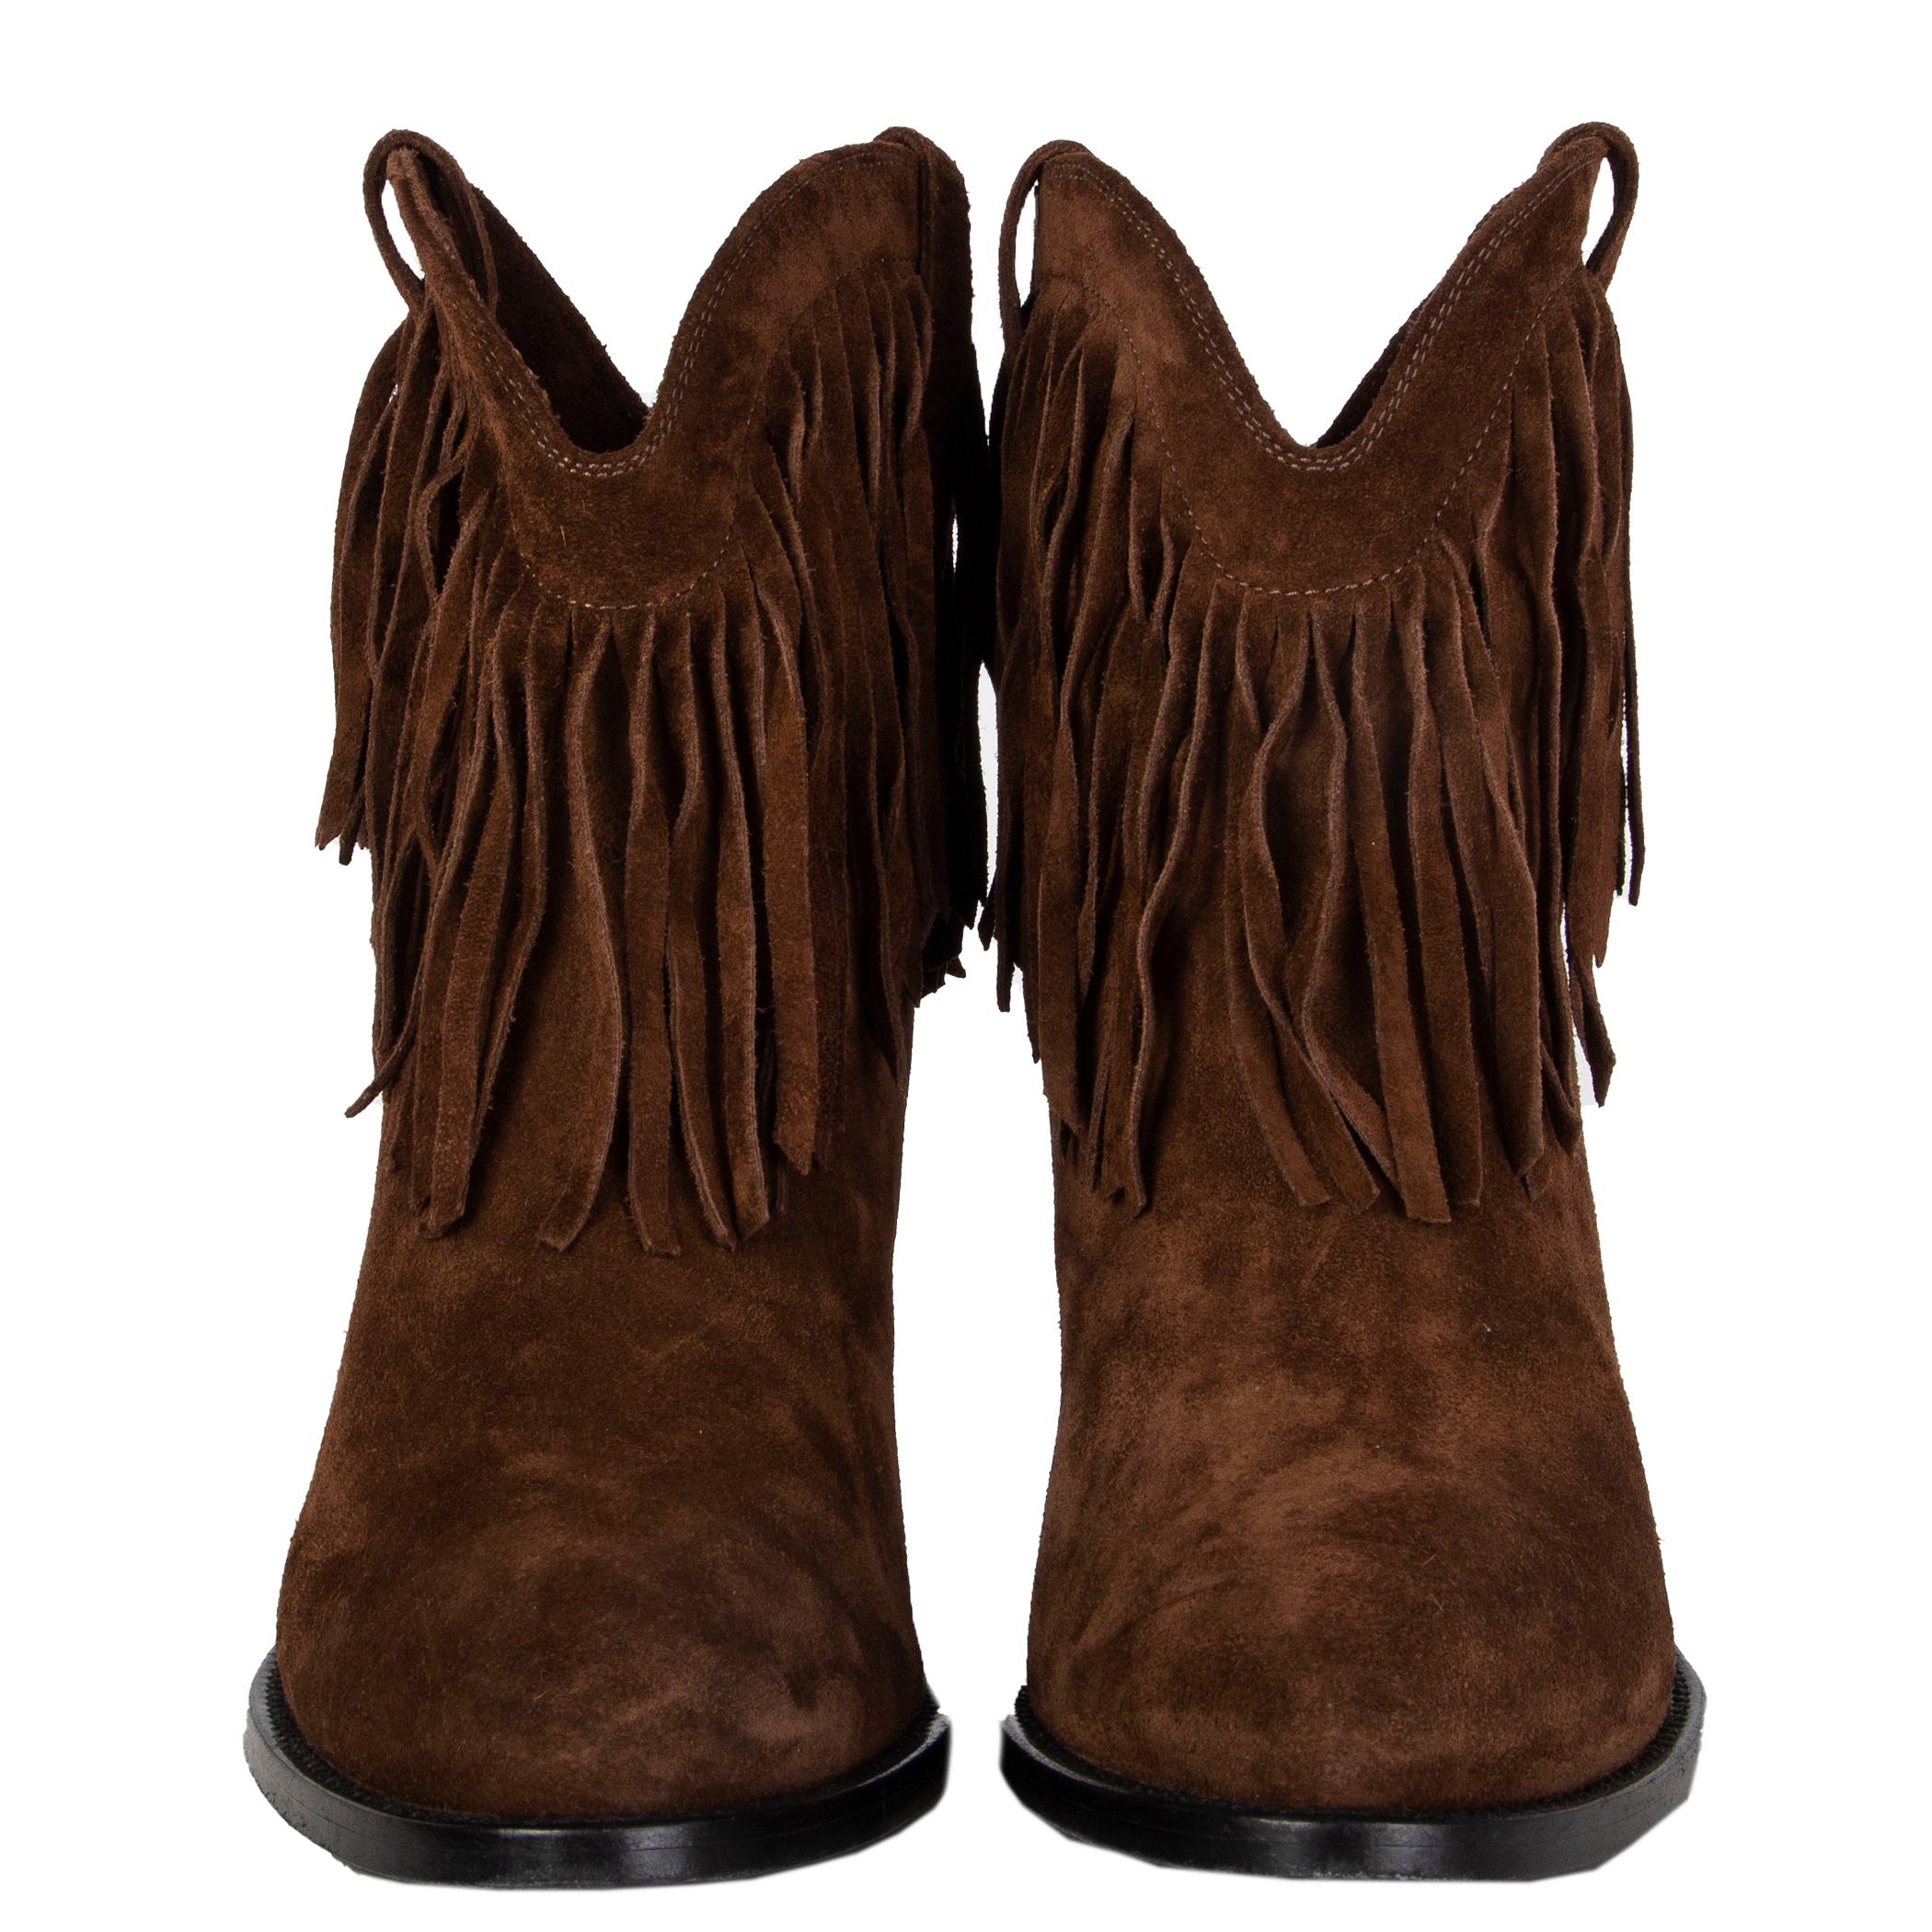 100% authentic Saitn Laurent 'Curtis' fringed western style ankle boots in brown suede. Have been worn once and are in virtually new condition. Come with dust bag. 

Measurements
Imprinted Size	40
Shoe Size	40
Inside Sole	27cm (10.5in)
Width	8cm